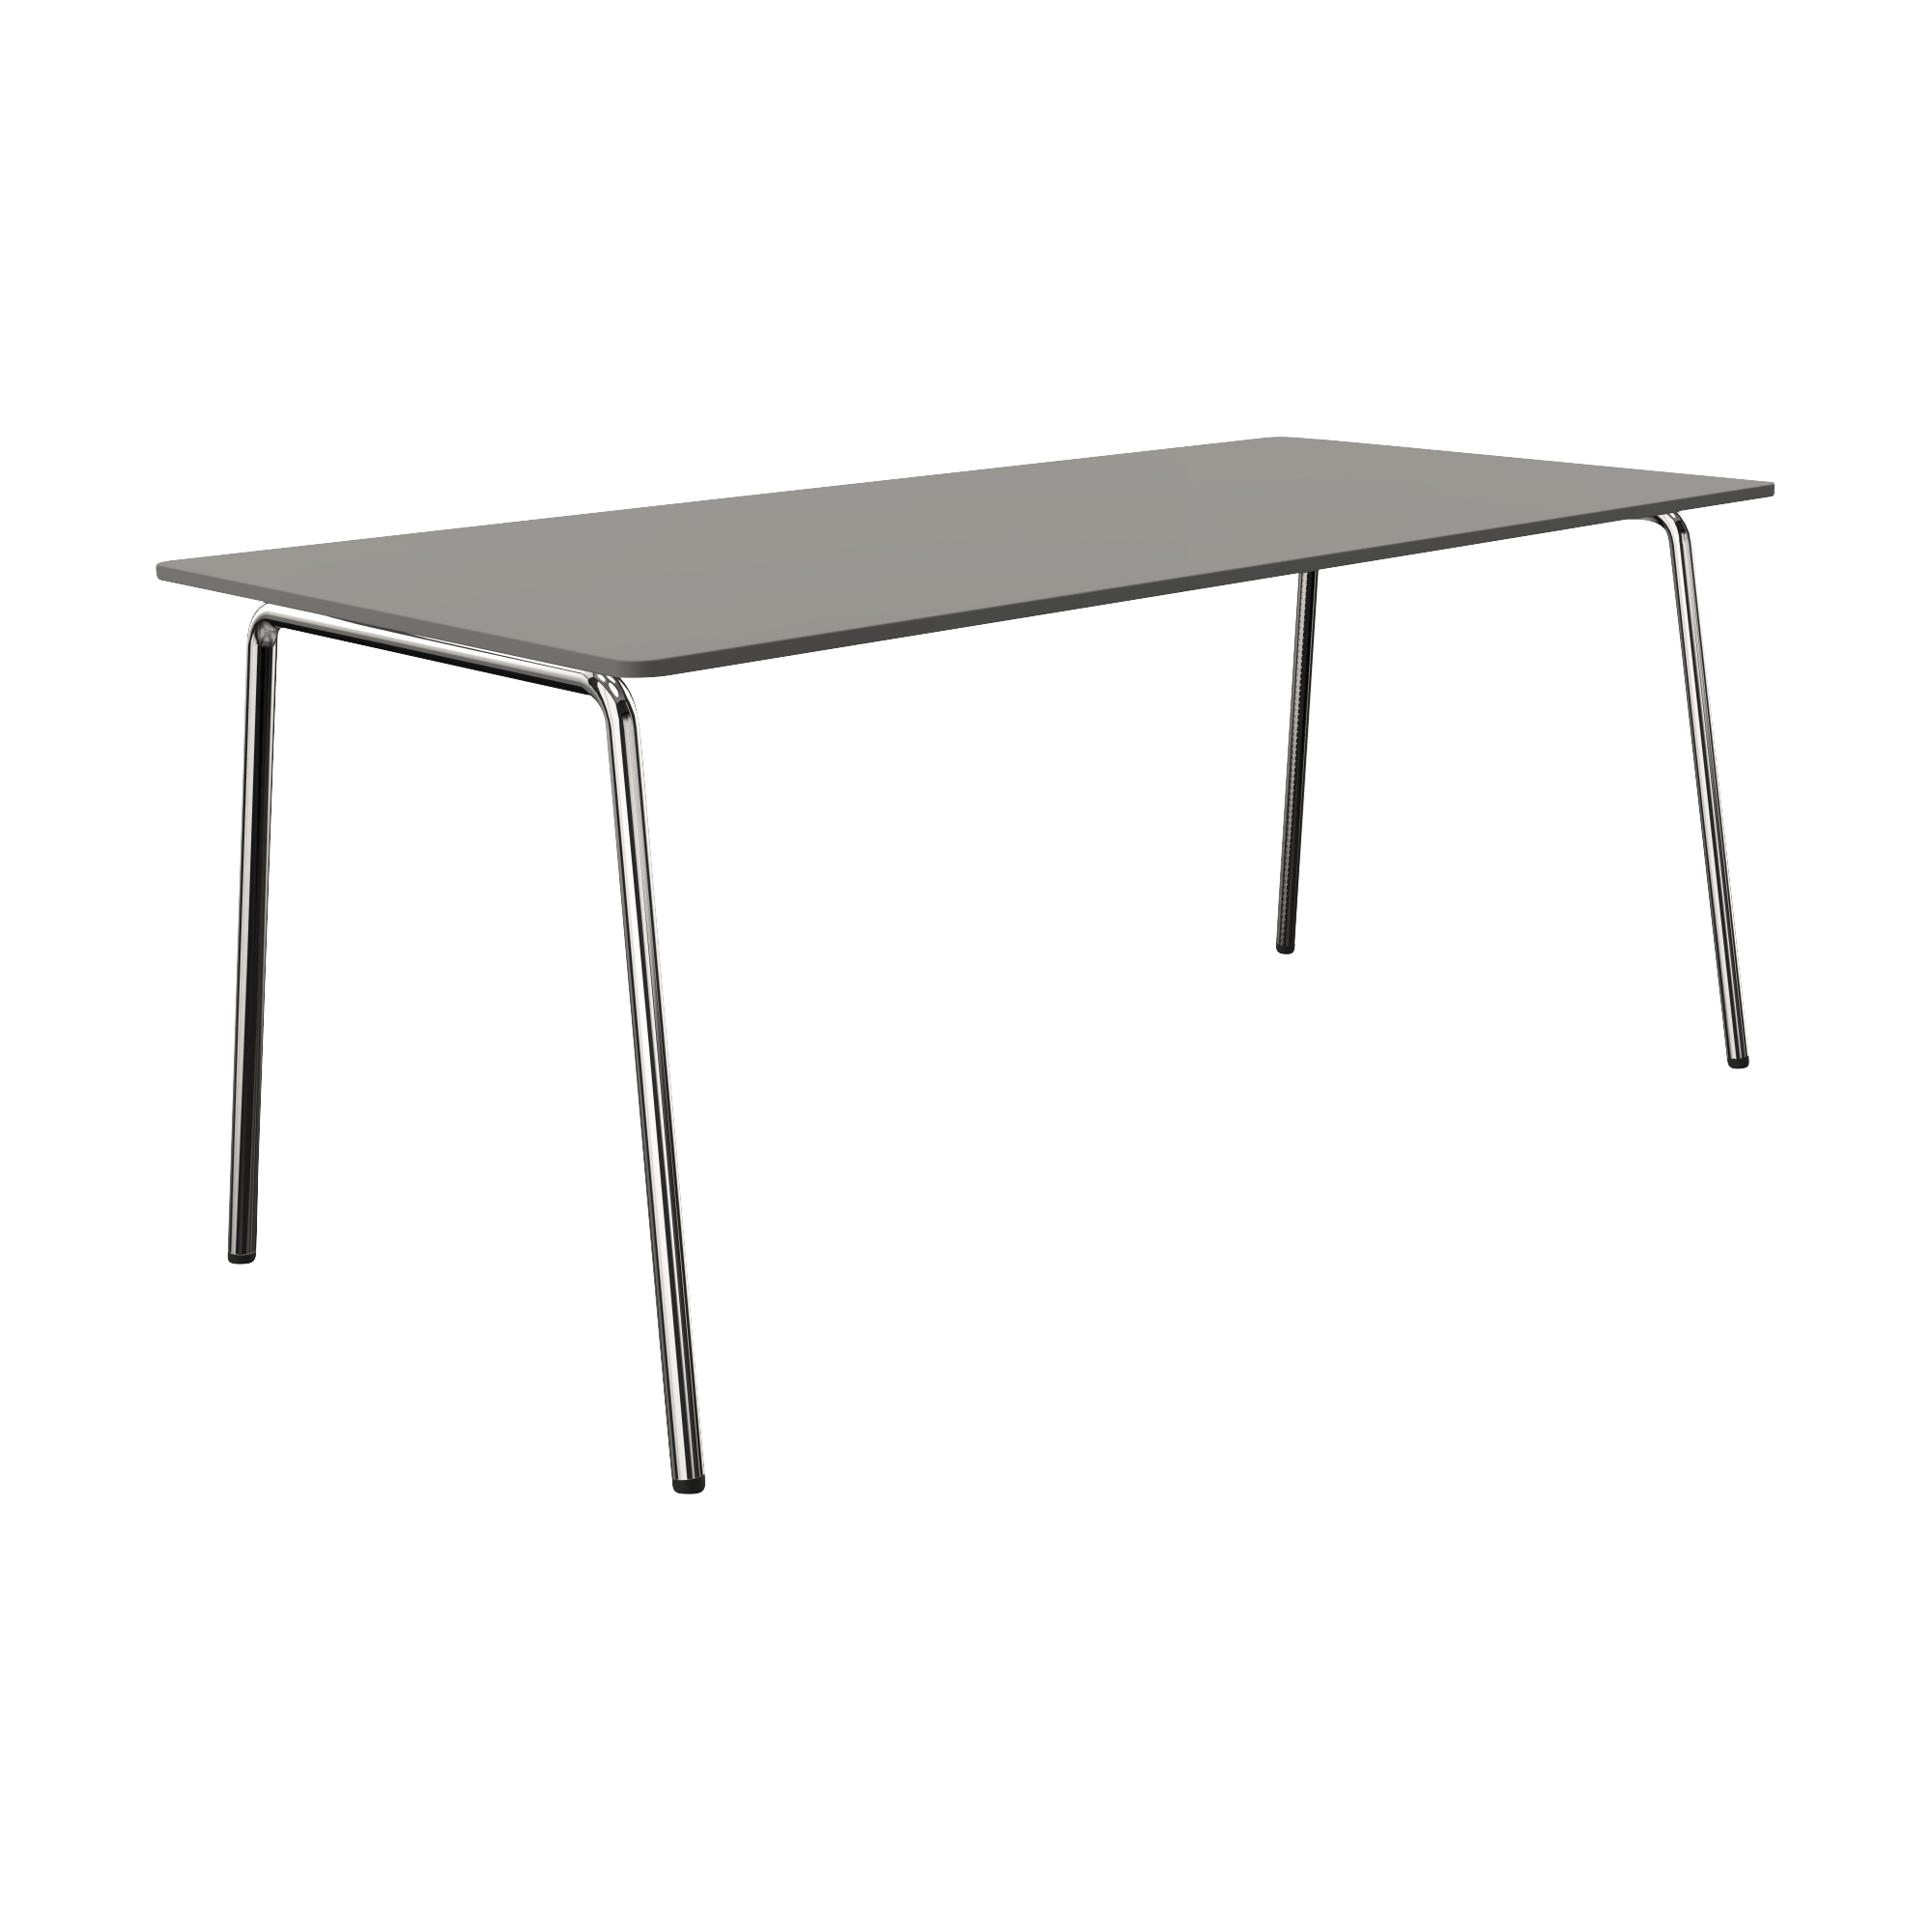 A grey table with a metal frame